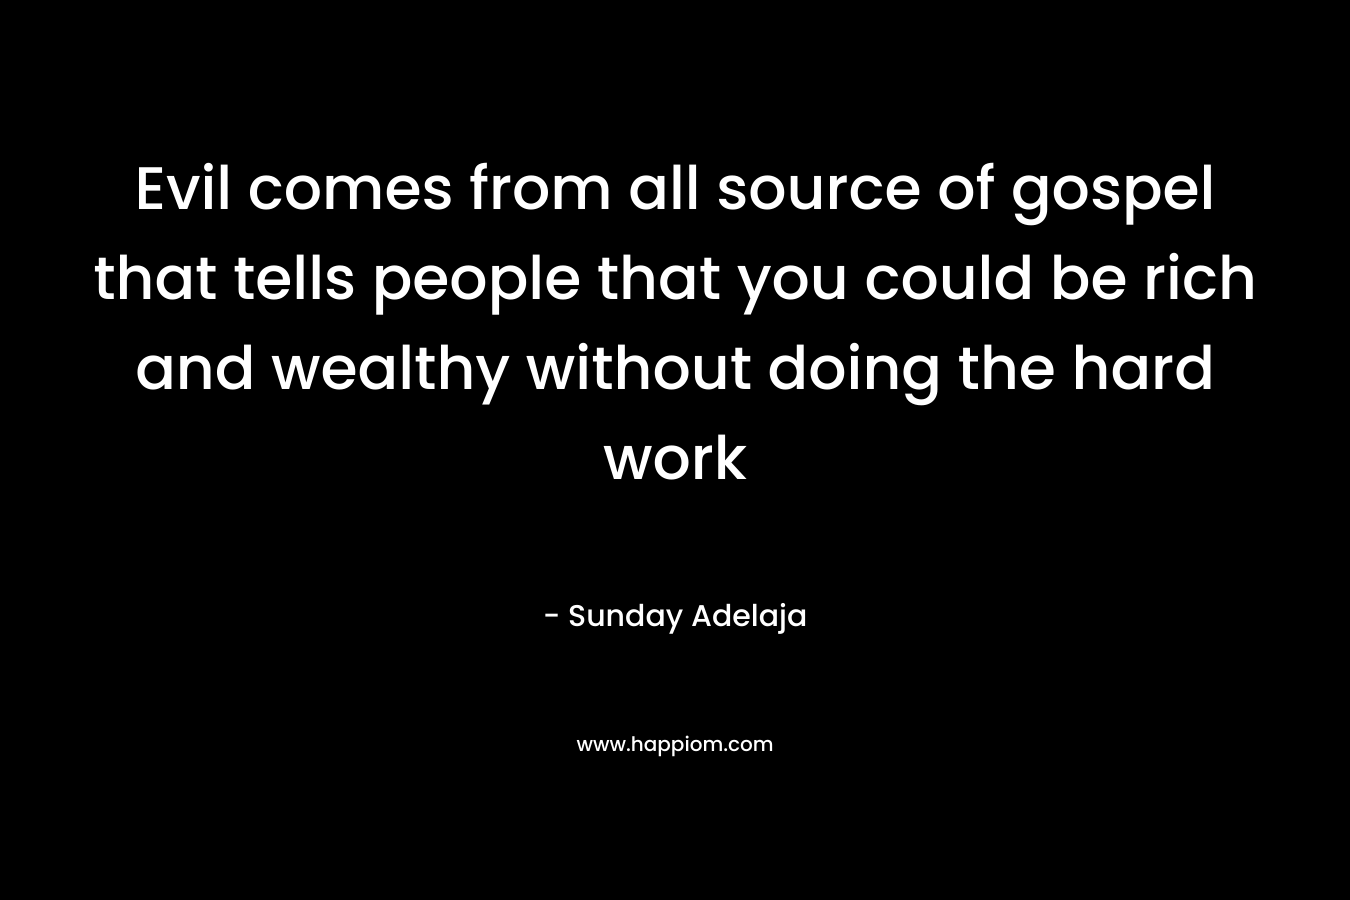 Evil comes from all source of gospel that tells people that you could be rich and wealthy without doing the hard work